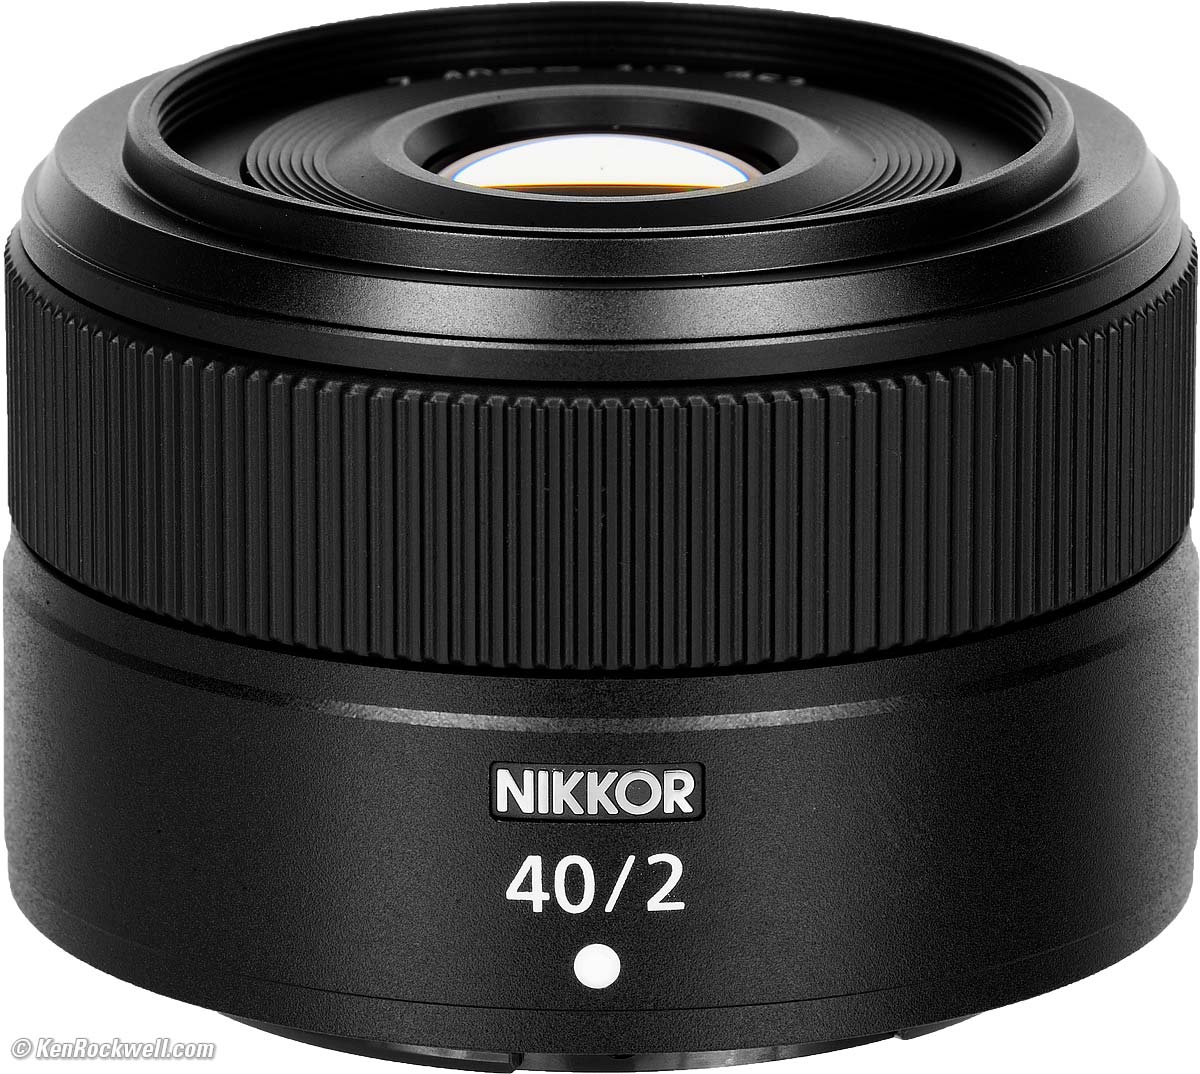 Nikon Z 40mm f/2 Review & Sample Images by Ken Rockwell